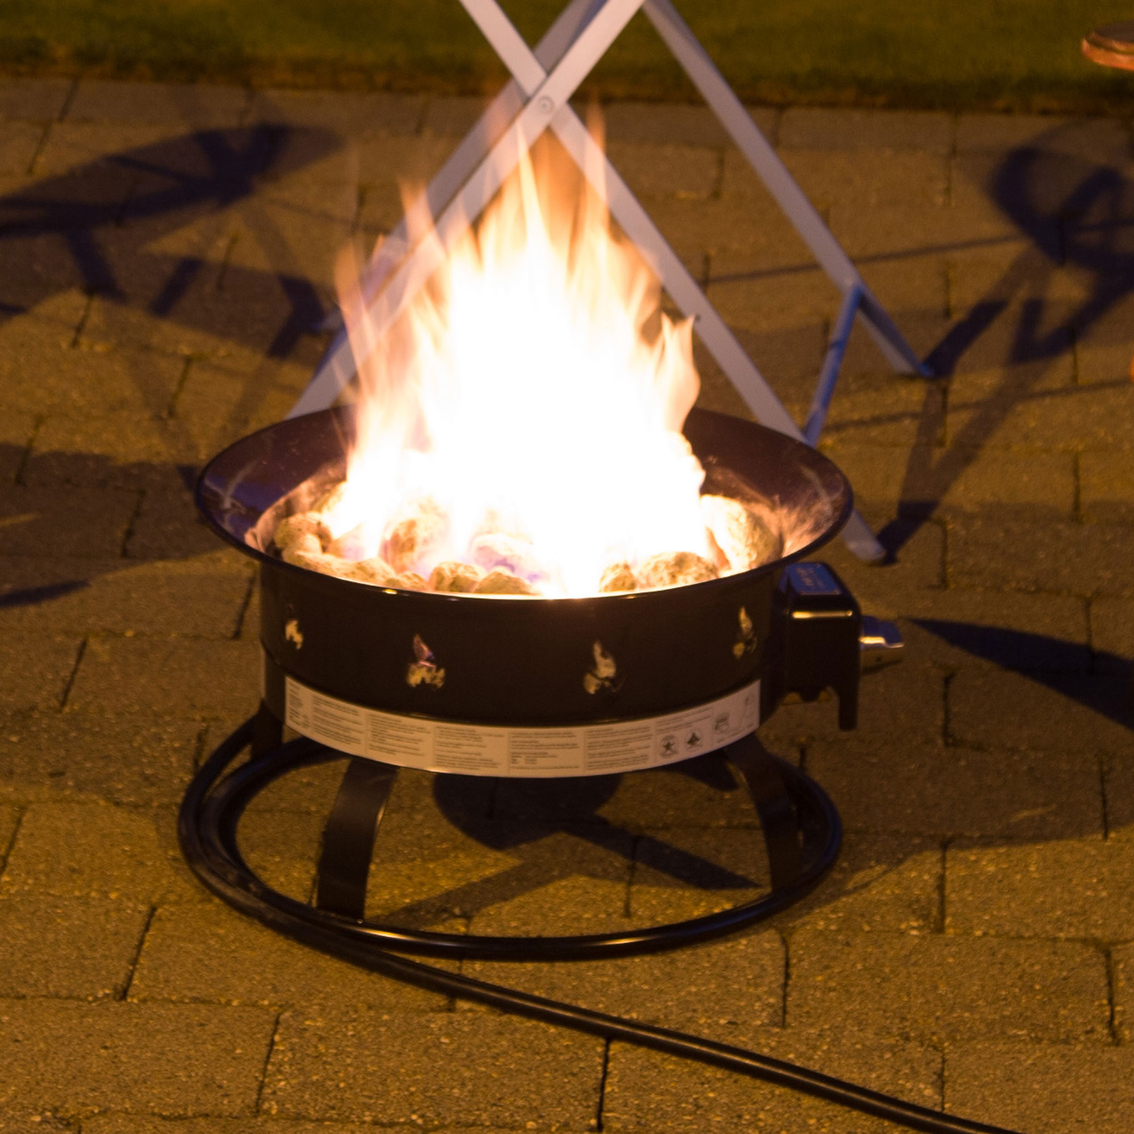 Portable Propane Outdoor Fire Pit by GarageMate - Image 2 of 2